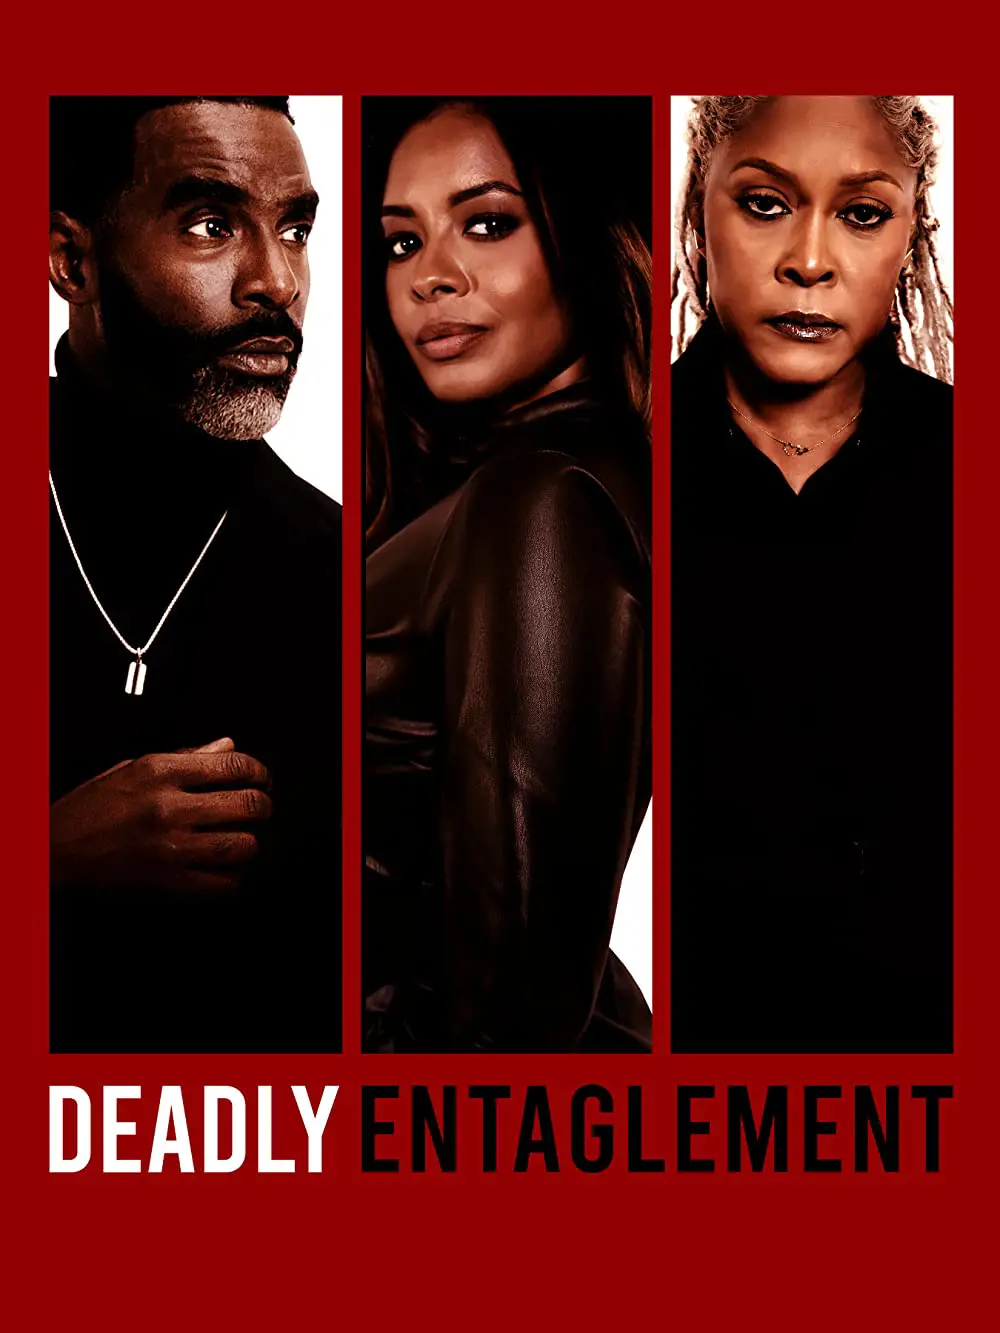 The new Bet Plus movie Deadly Entanglement is all set to release on June 8, 2023 on Bet Plus